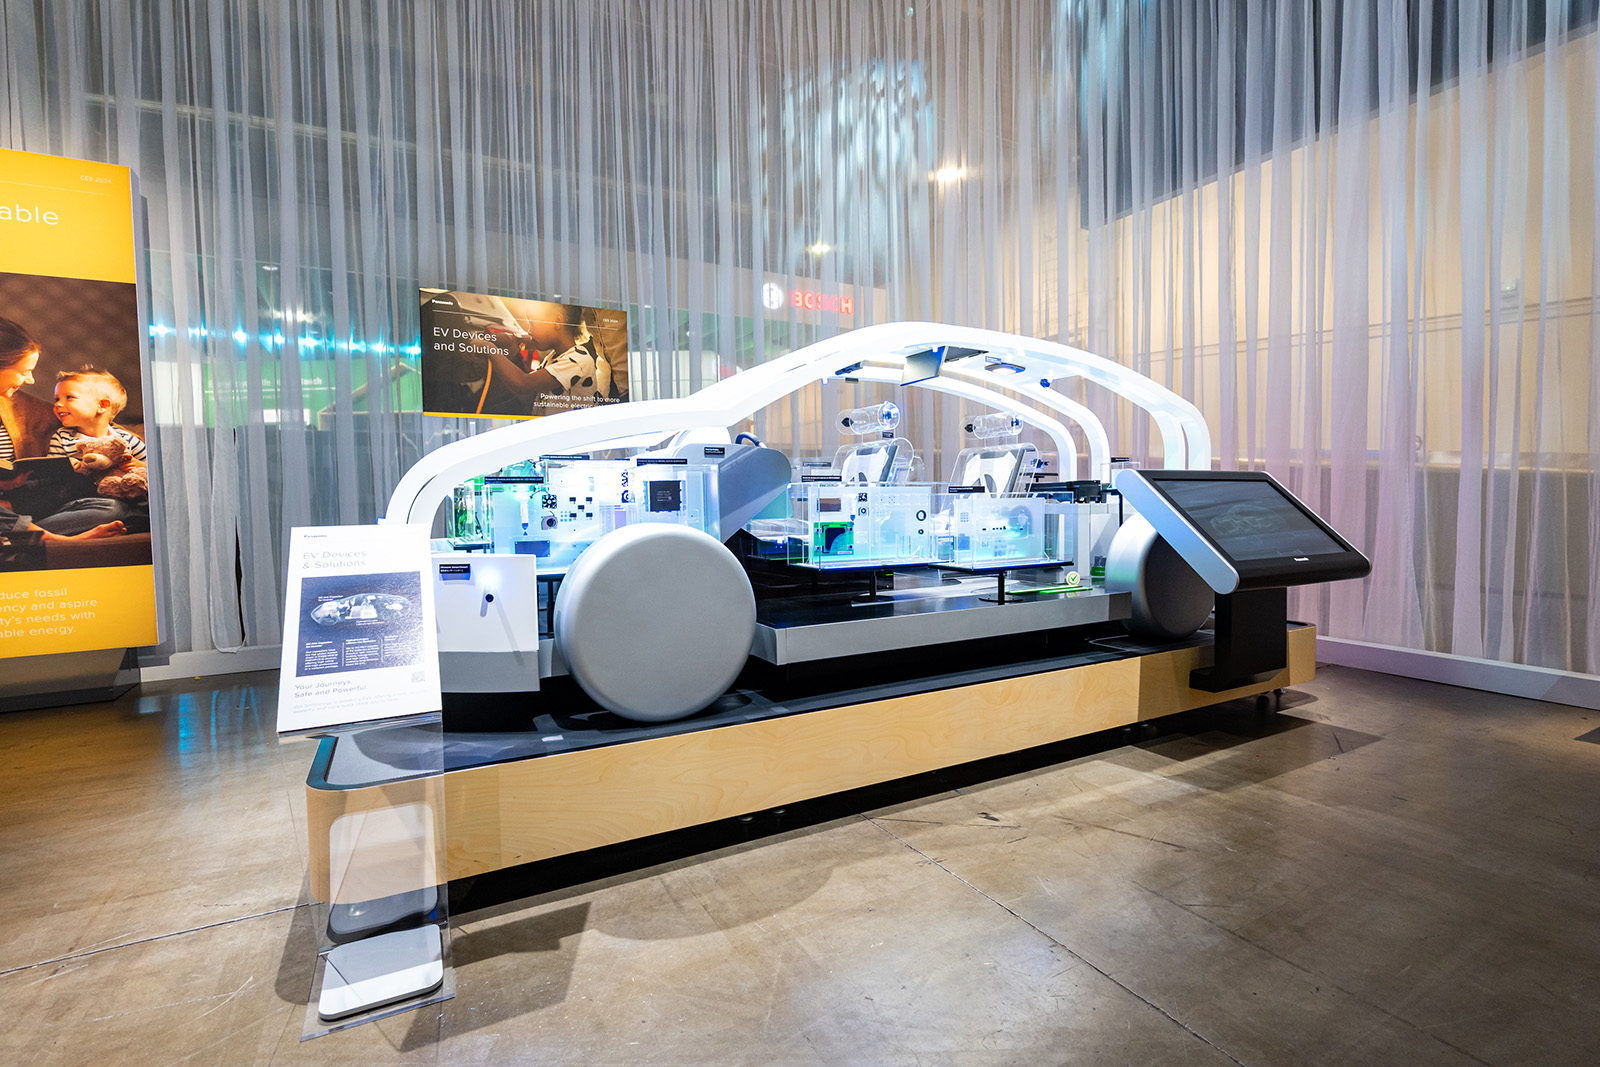 Photo: Exhibits of EV devices and solutions